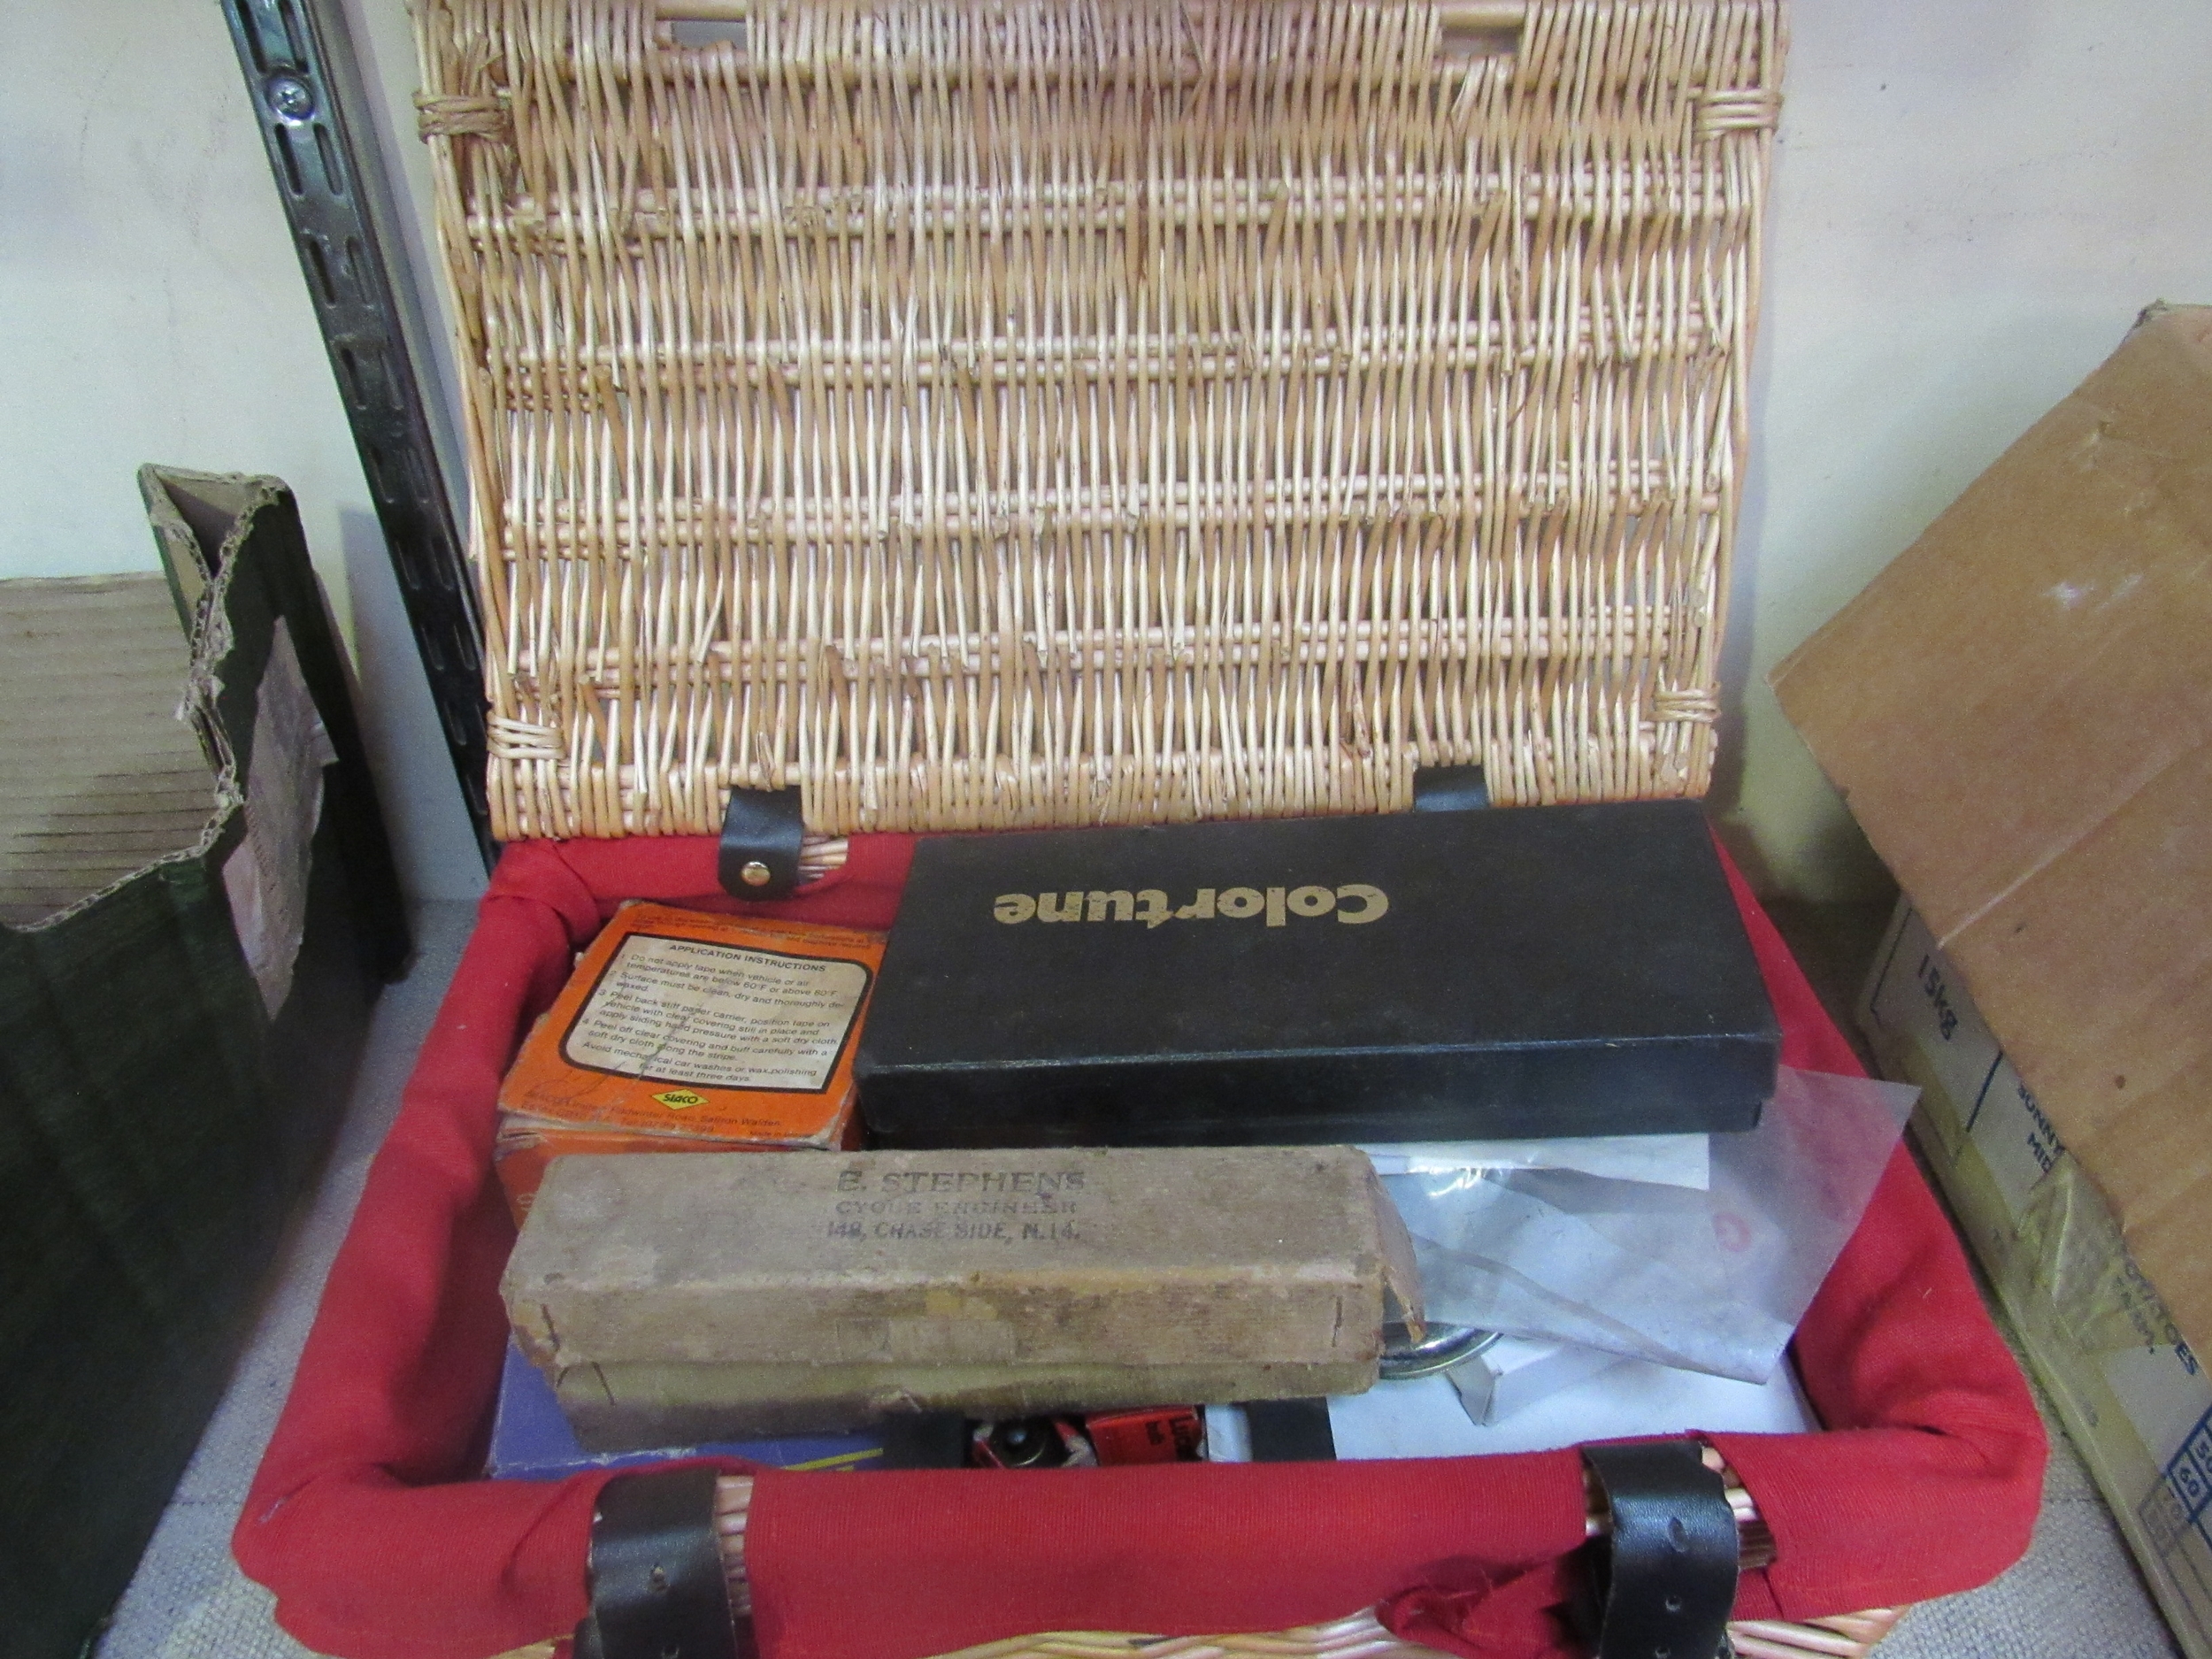 A wicker hamper containing mixed bike spares etc. including bulbs and inner tubes